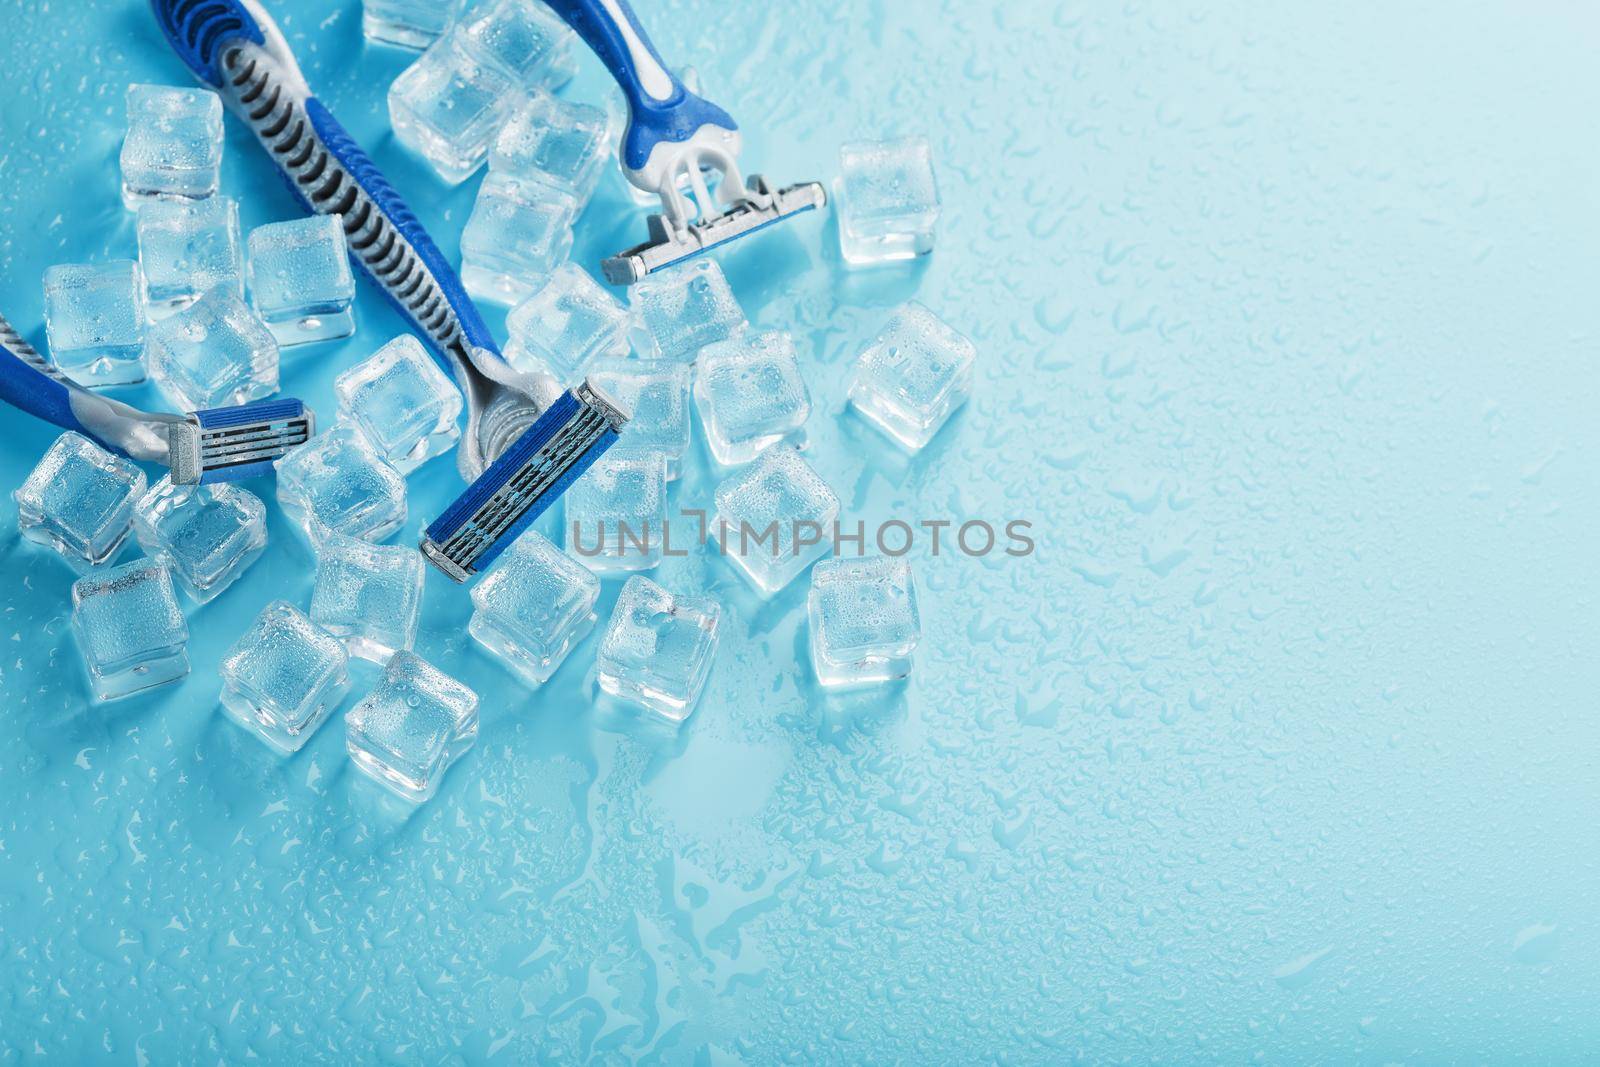 Refreshing shaving machines for the face against the background of frosty ice cubes by AlexGrec